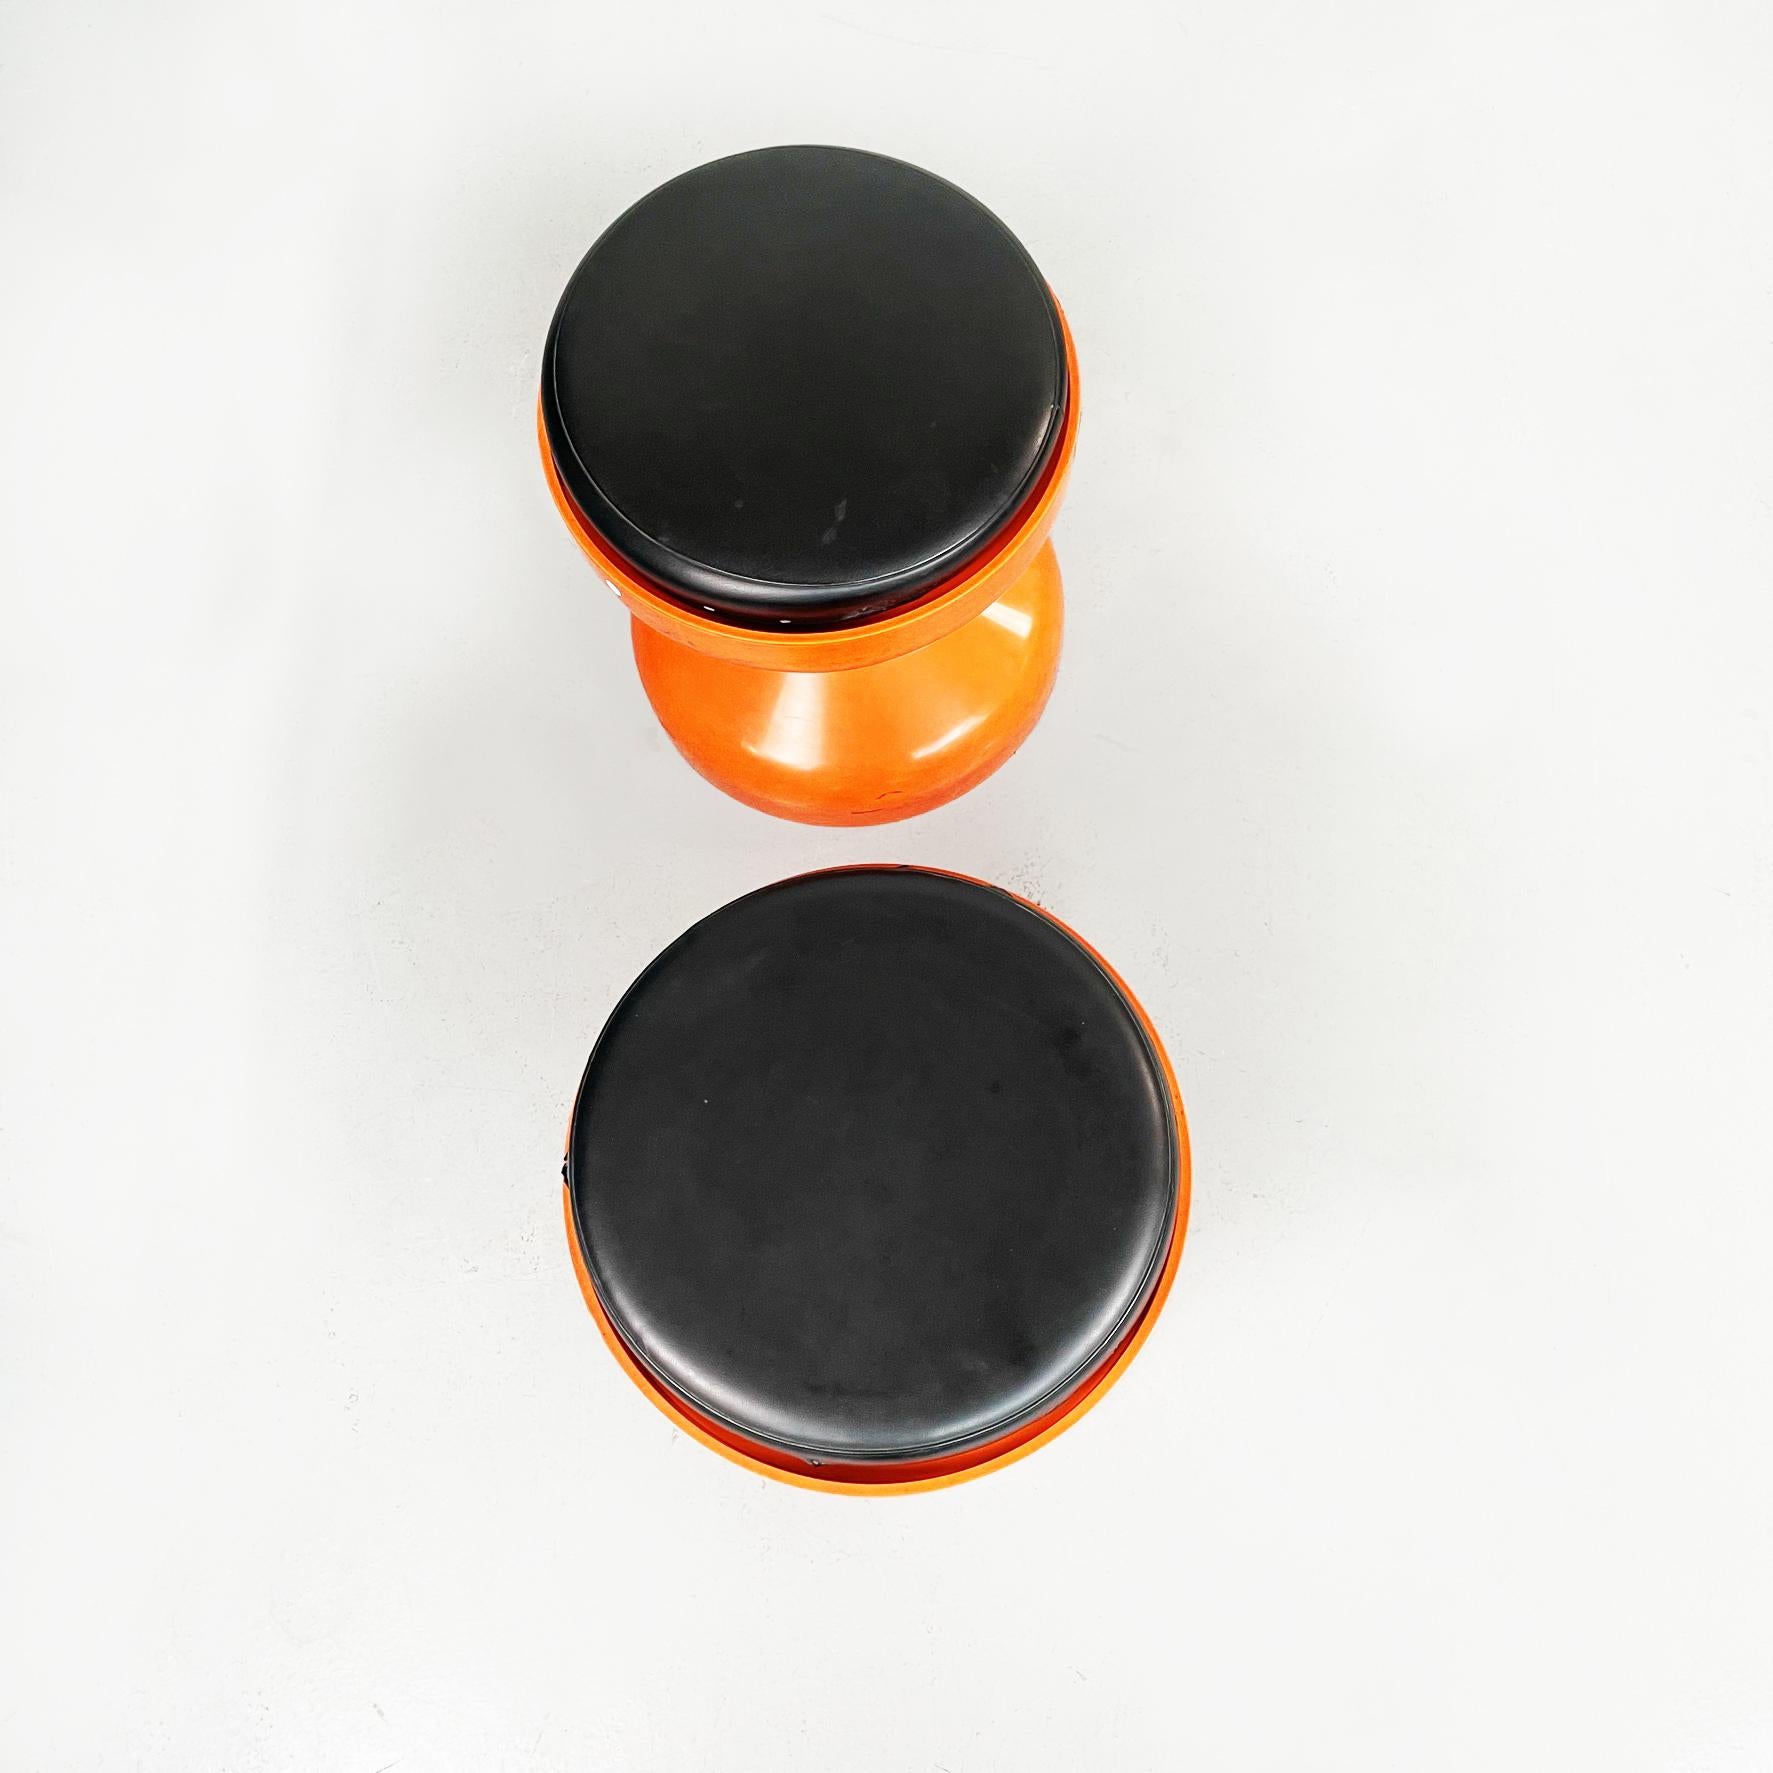 Italian space age orange plastic Rocchetto stools by Castiglioni for Kartell, 1970s
Pair of Rocchetto stools in bright orange plastic. The structure has a sinuous shape: it's tightens in the middle and widens towards the base and seat. A black